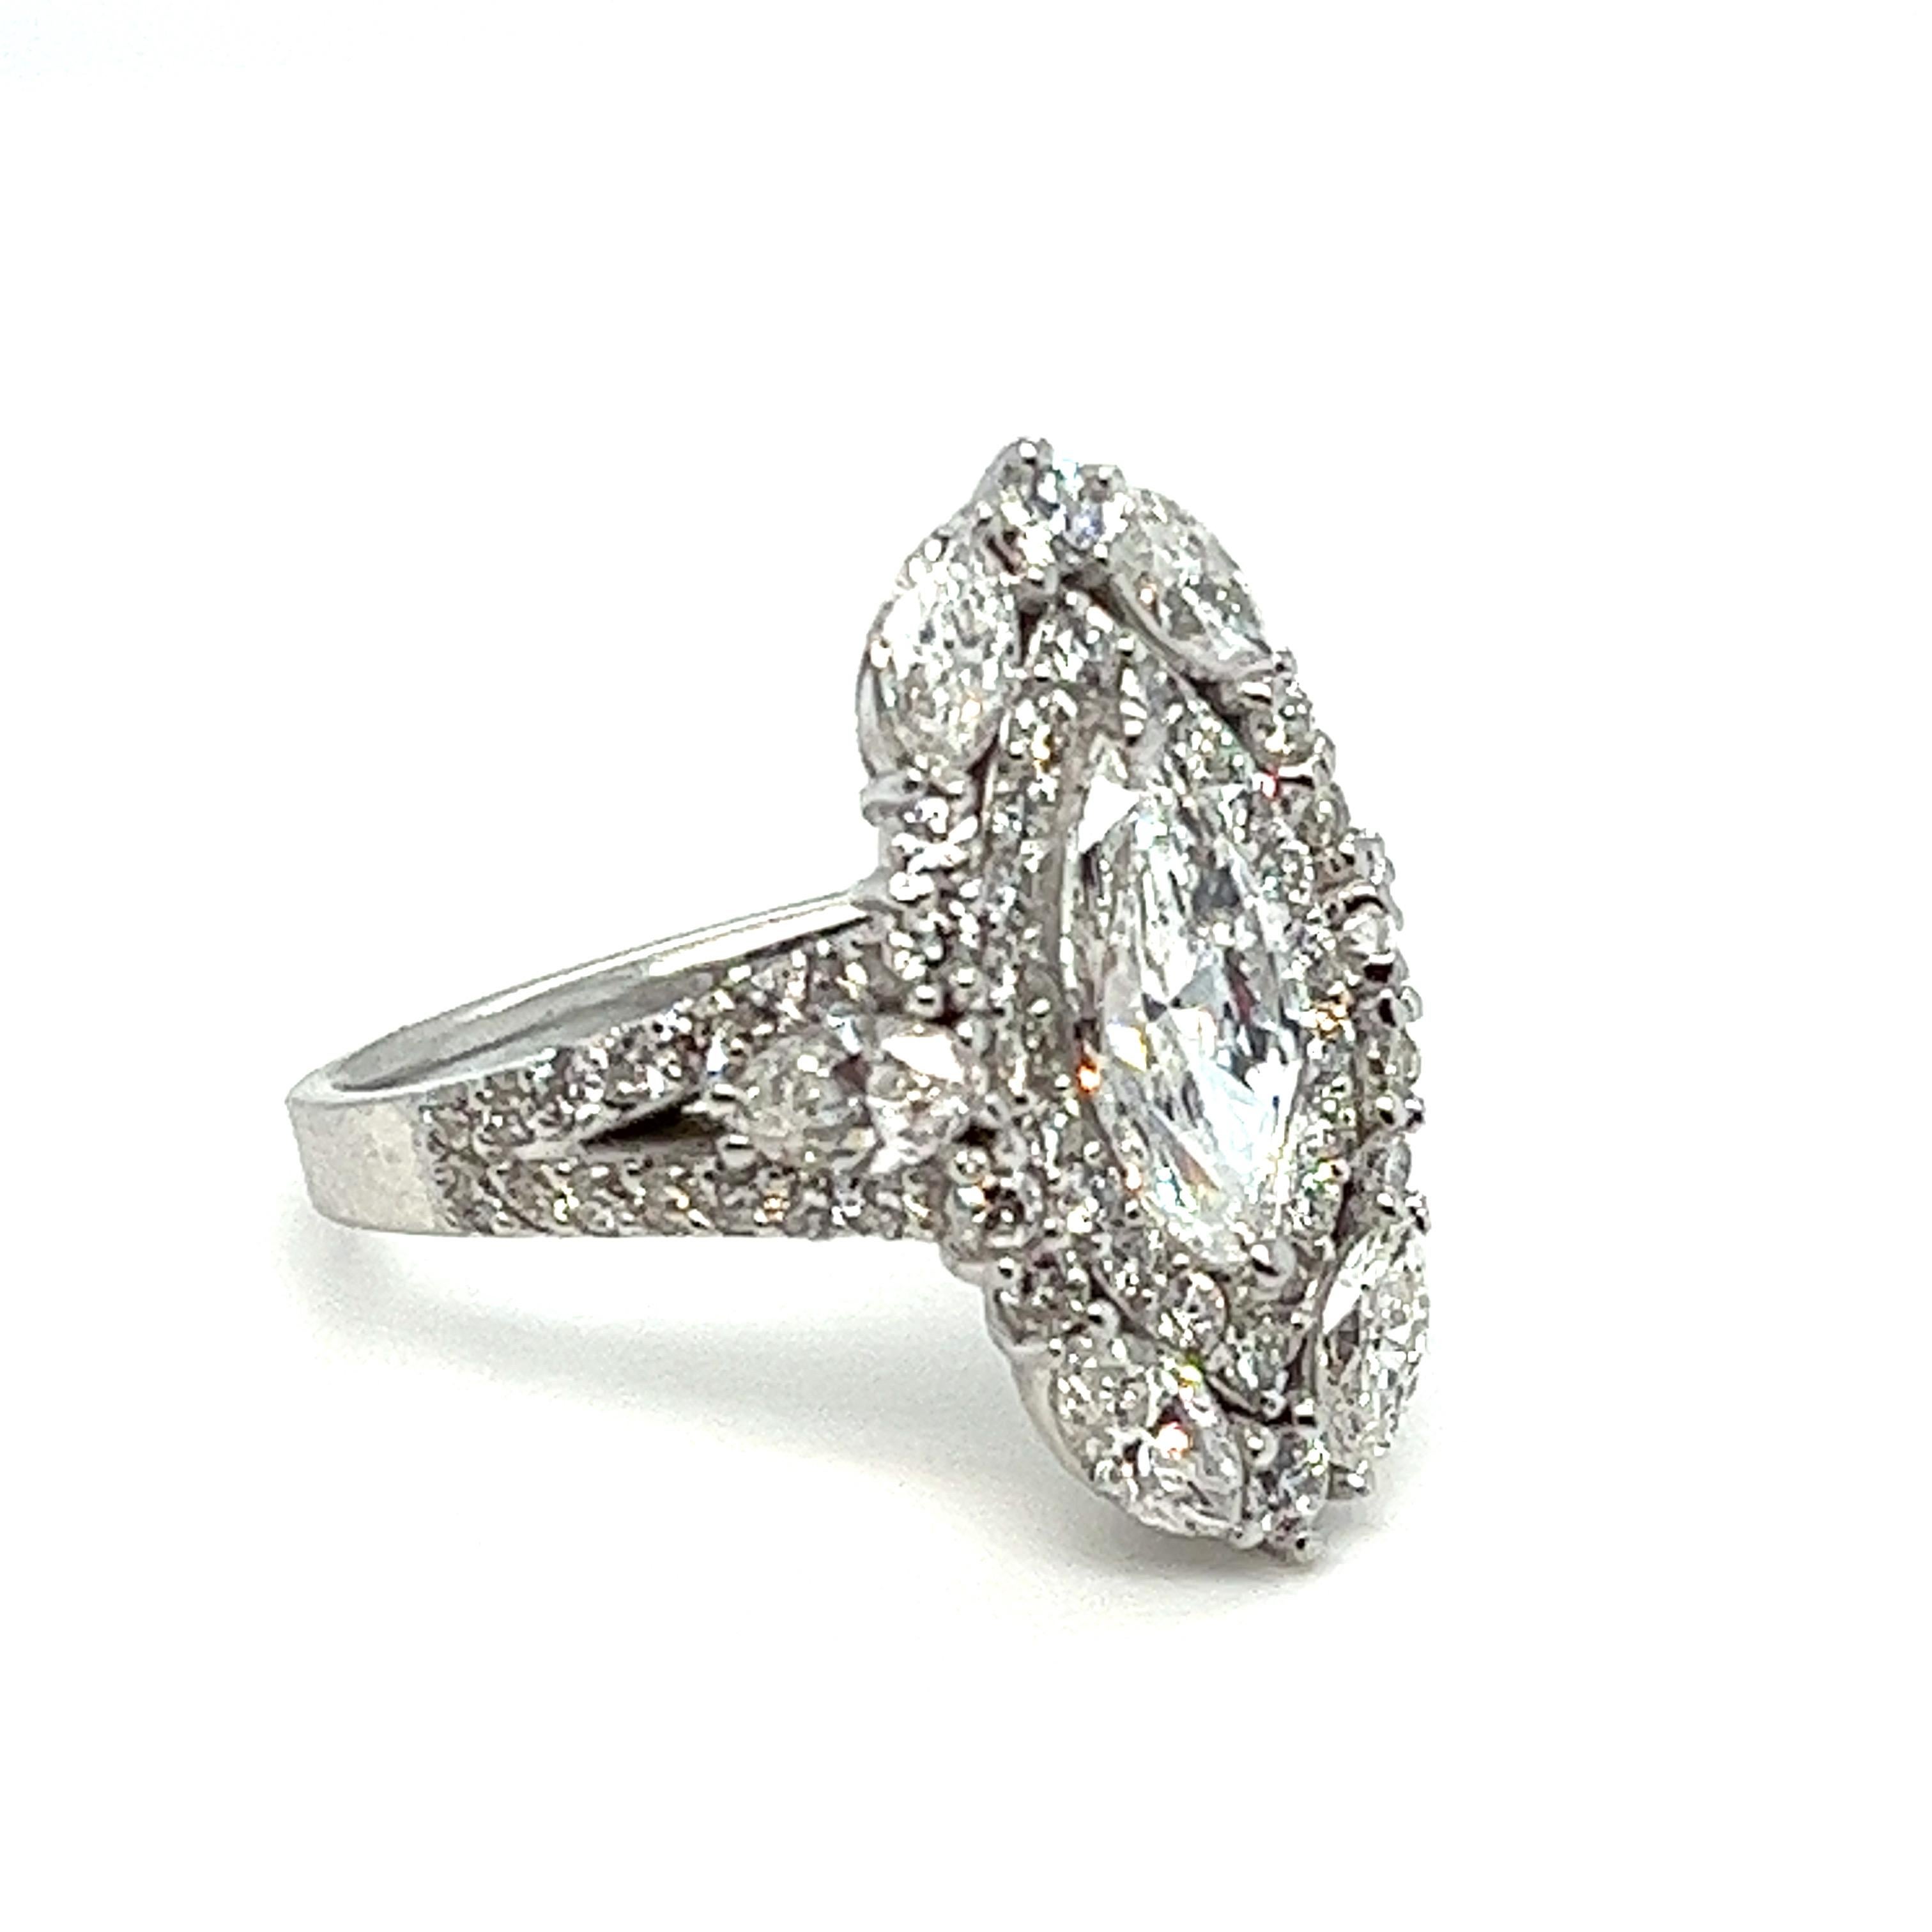 Contemporary Stunning 2.99 Carat Total Weight Marquise Diamond Ring in 18K White Gold For Sale